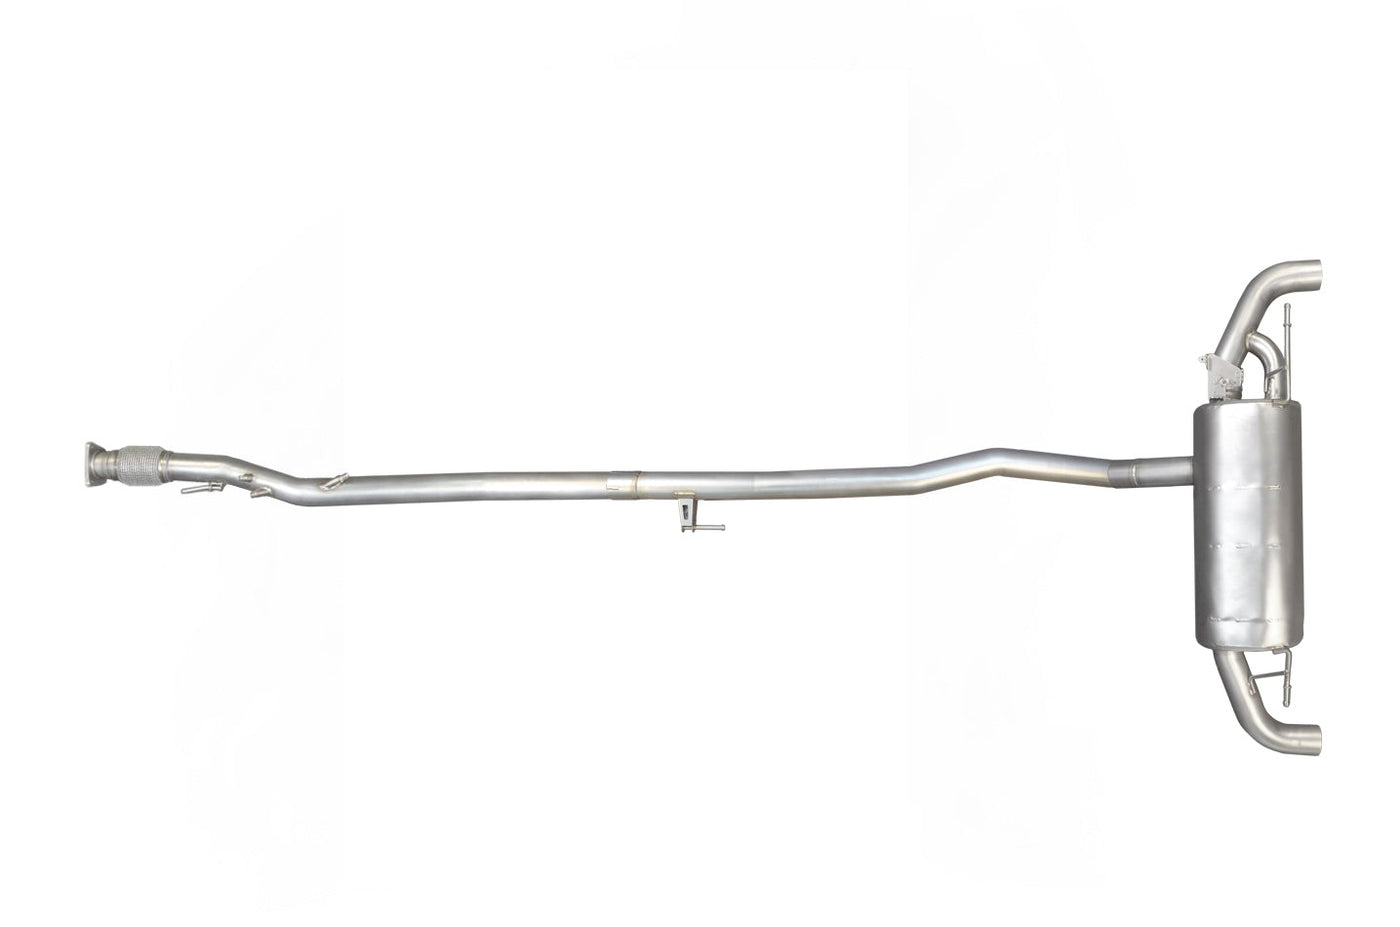 ipe-mercedes-benz-a35-w177-3-exhaust-full-system